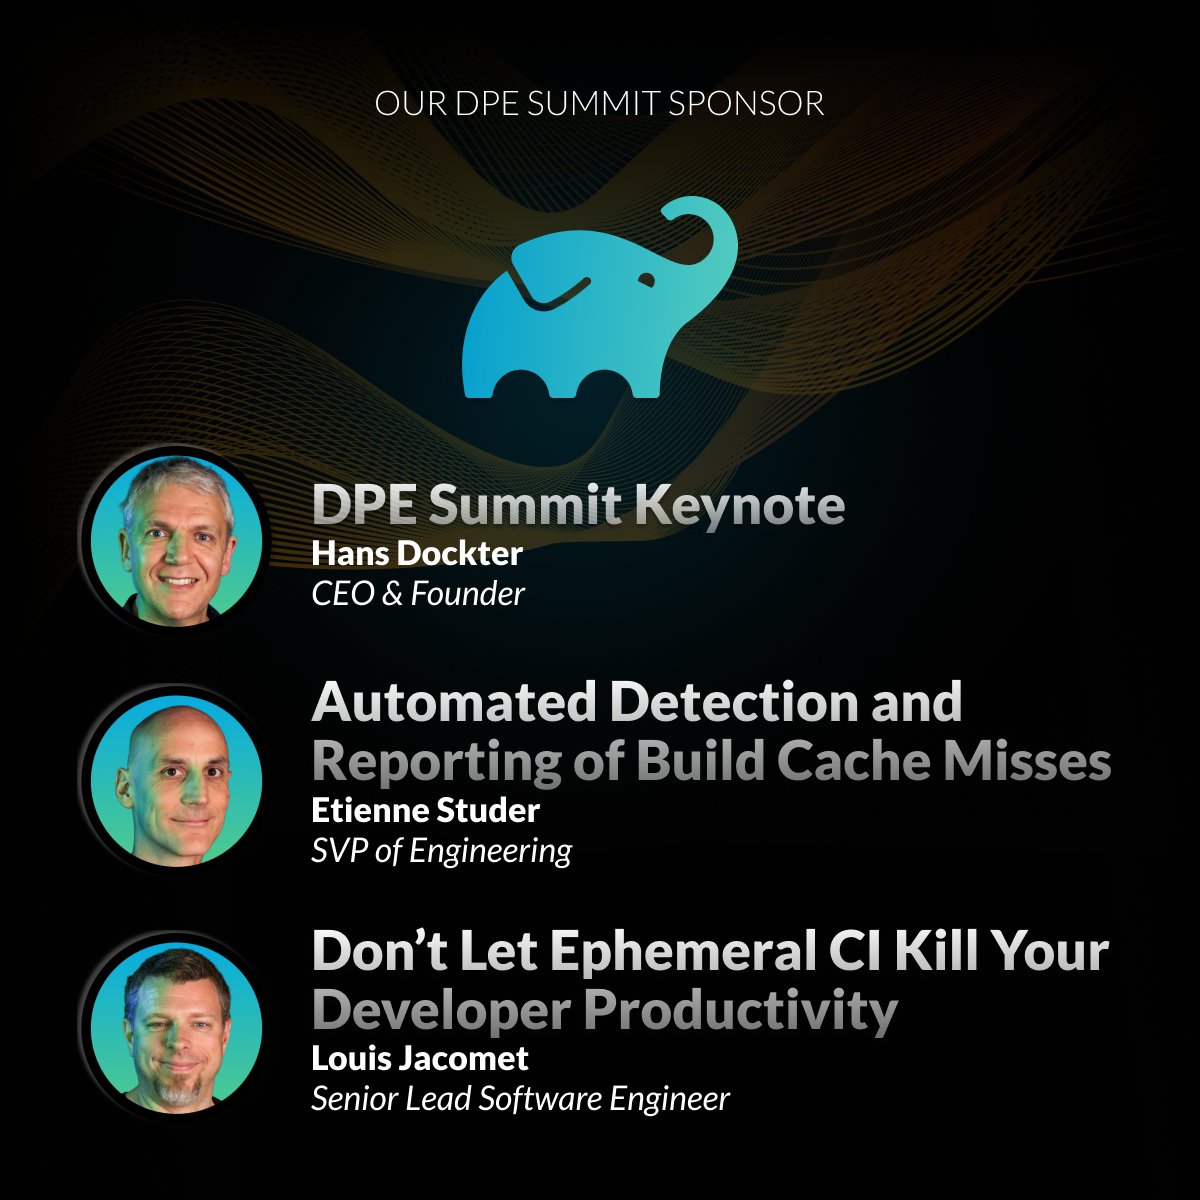 We can’t wait to join our very own @etiennestuder, @ljacomet, and @hans_d at #DPESummit23 as they present on tools & tactics related to #DeveloperProductivityEngineering. Curious what you’ll learn? Check out their talk titles below and then get your ticket at